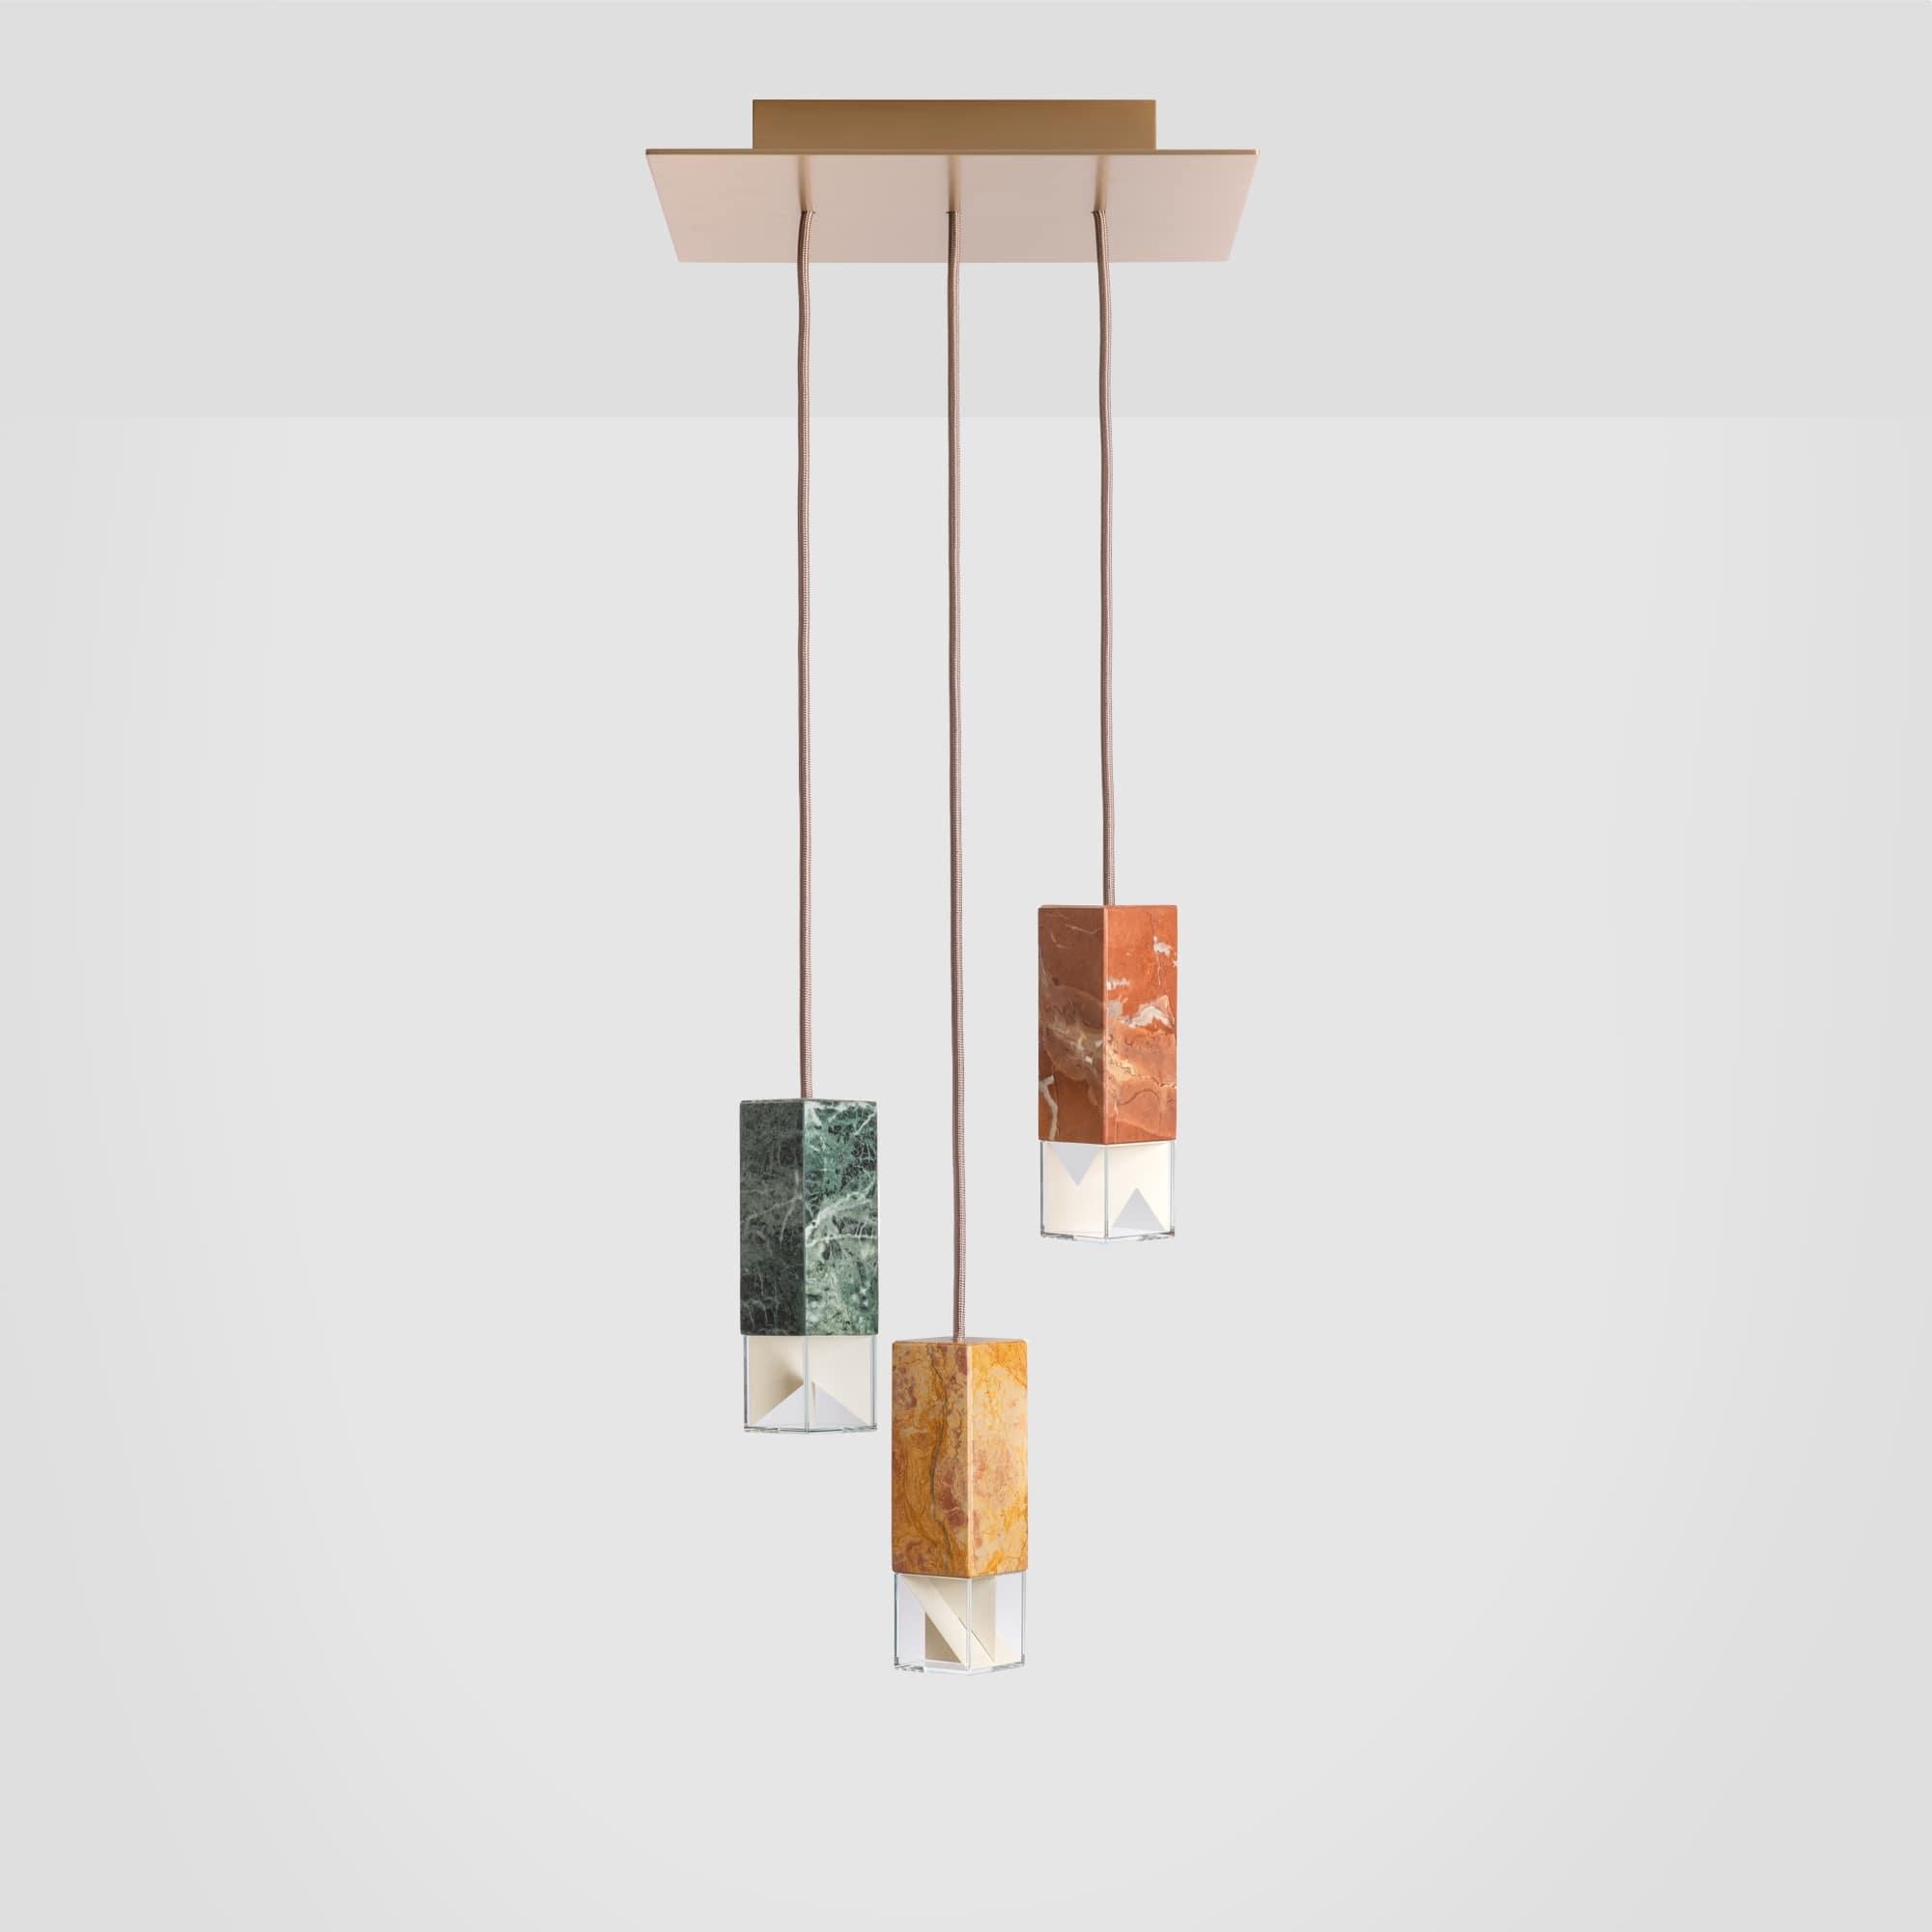 Lamp one trio chandelier in brass by Formaminima
Limited edition
Dimensions: 30 x 30 x H 68 cm
Materials: Red Collemandina, Green Alpes, Royal pink yellow
 Satin solid brass, crystal glass diffuser
 Limoges biscuit-finish porcelain